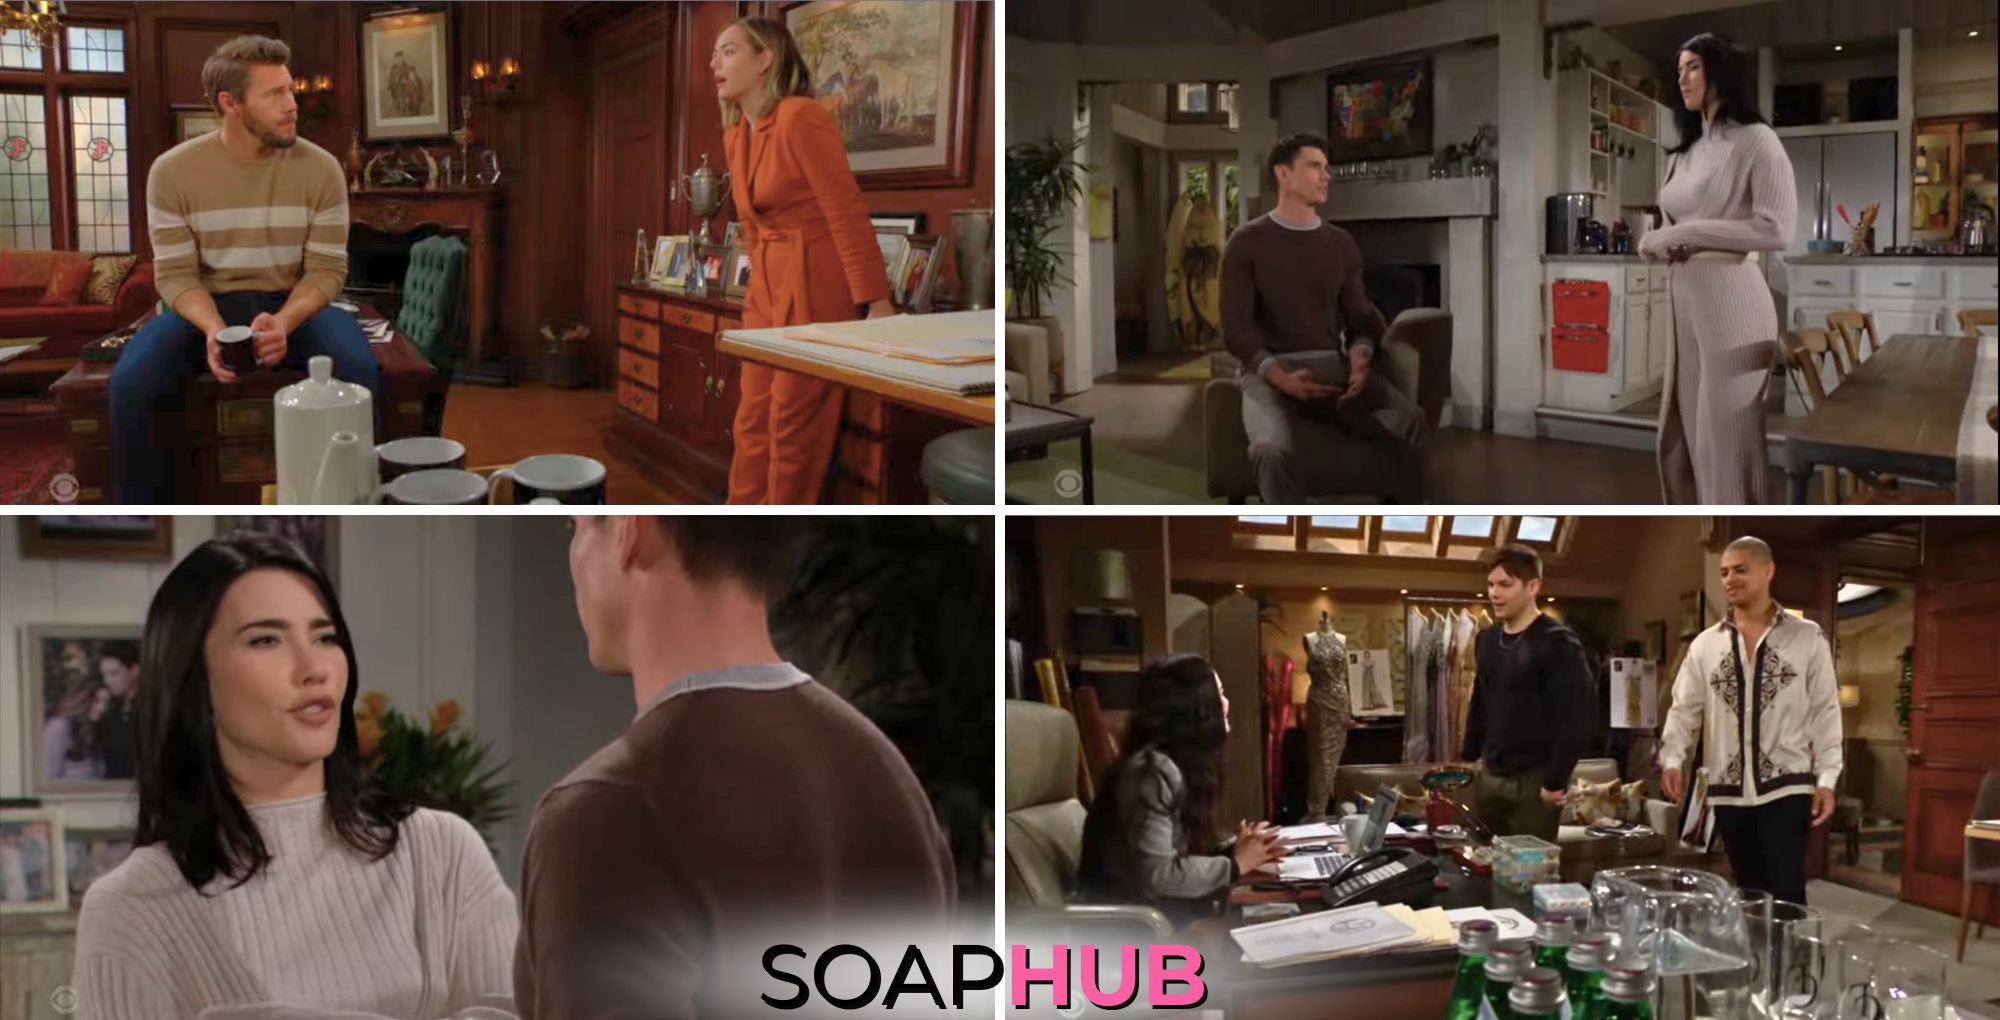 The Bold and the Beautiful recap for April 1 features Steffy, Finn, Hope, Liam, Zende, RJ and Luna with the Soap Hub logo across the bottom.